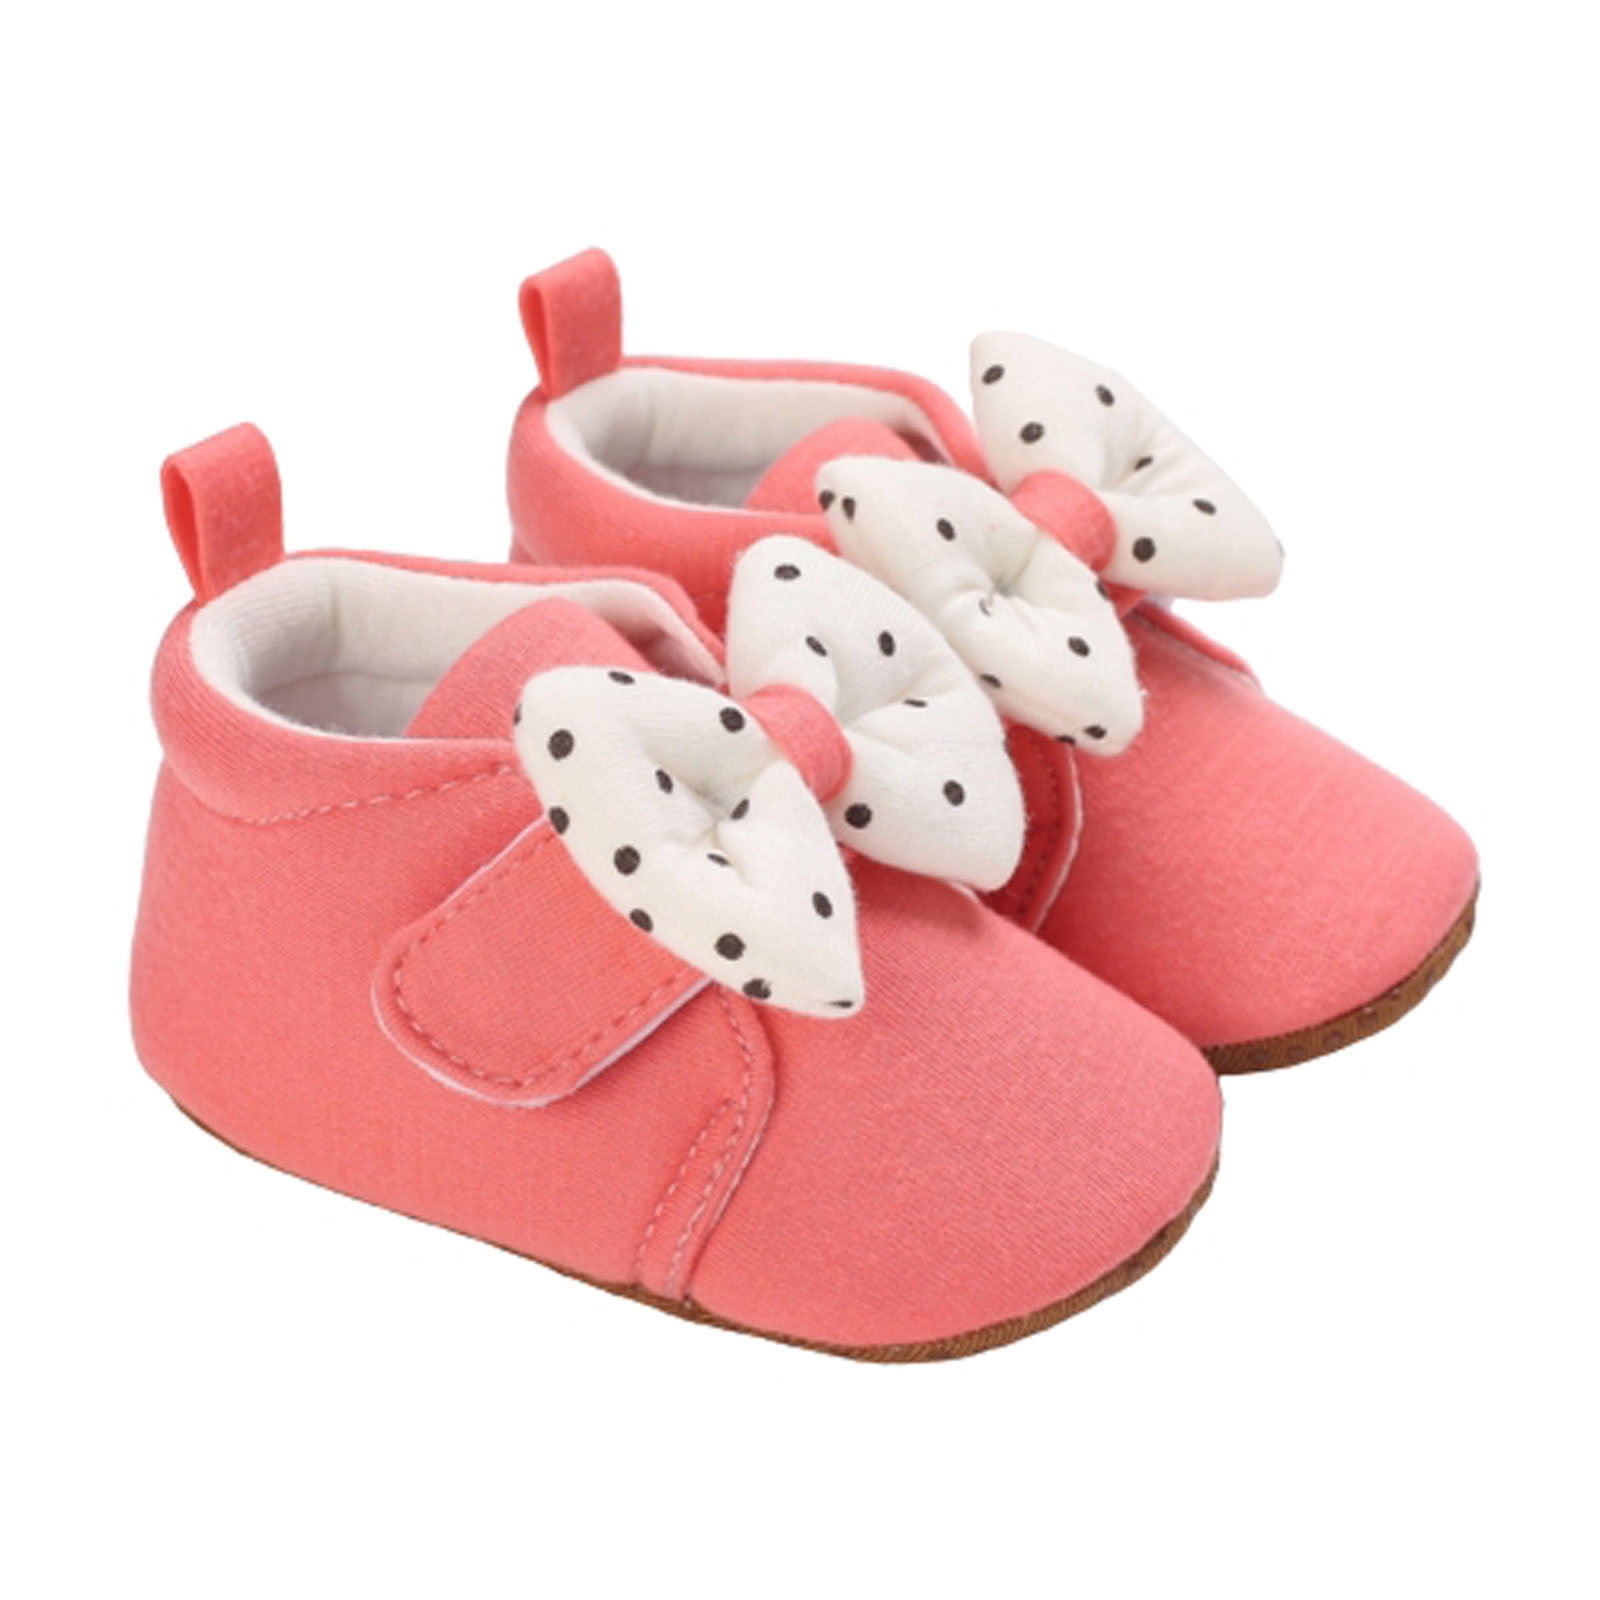 JGTDBPO Baby Shoes For Toddler Boys Girls First Walking Shoes Infant ...